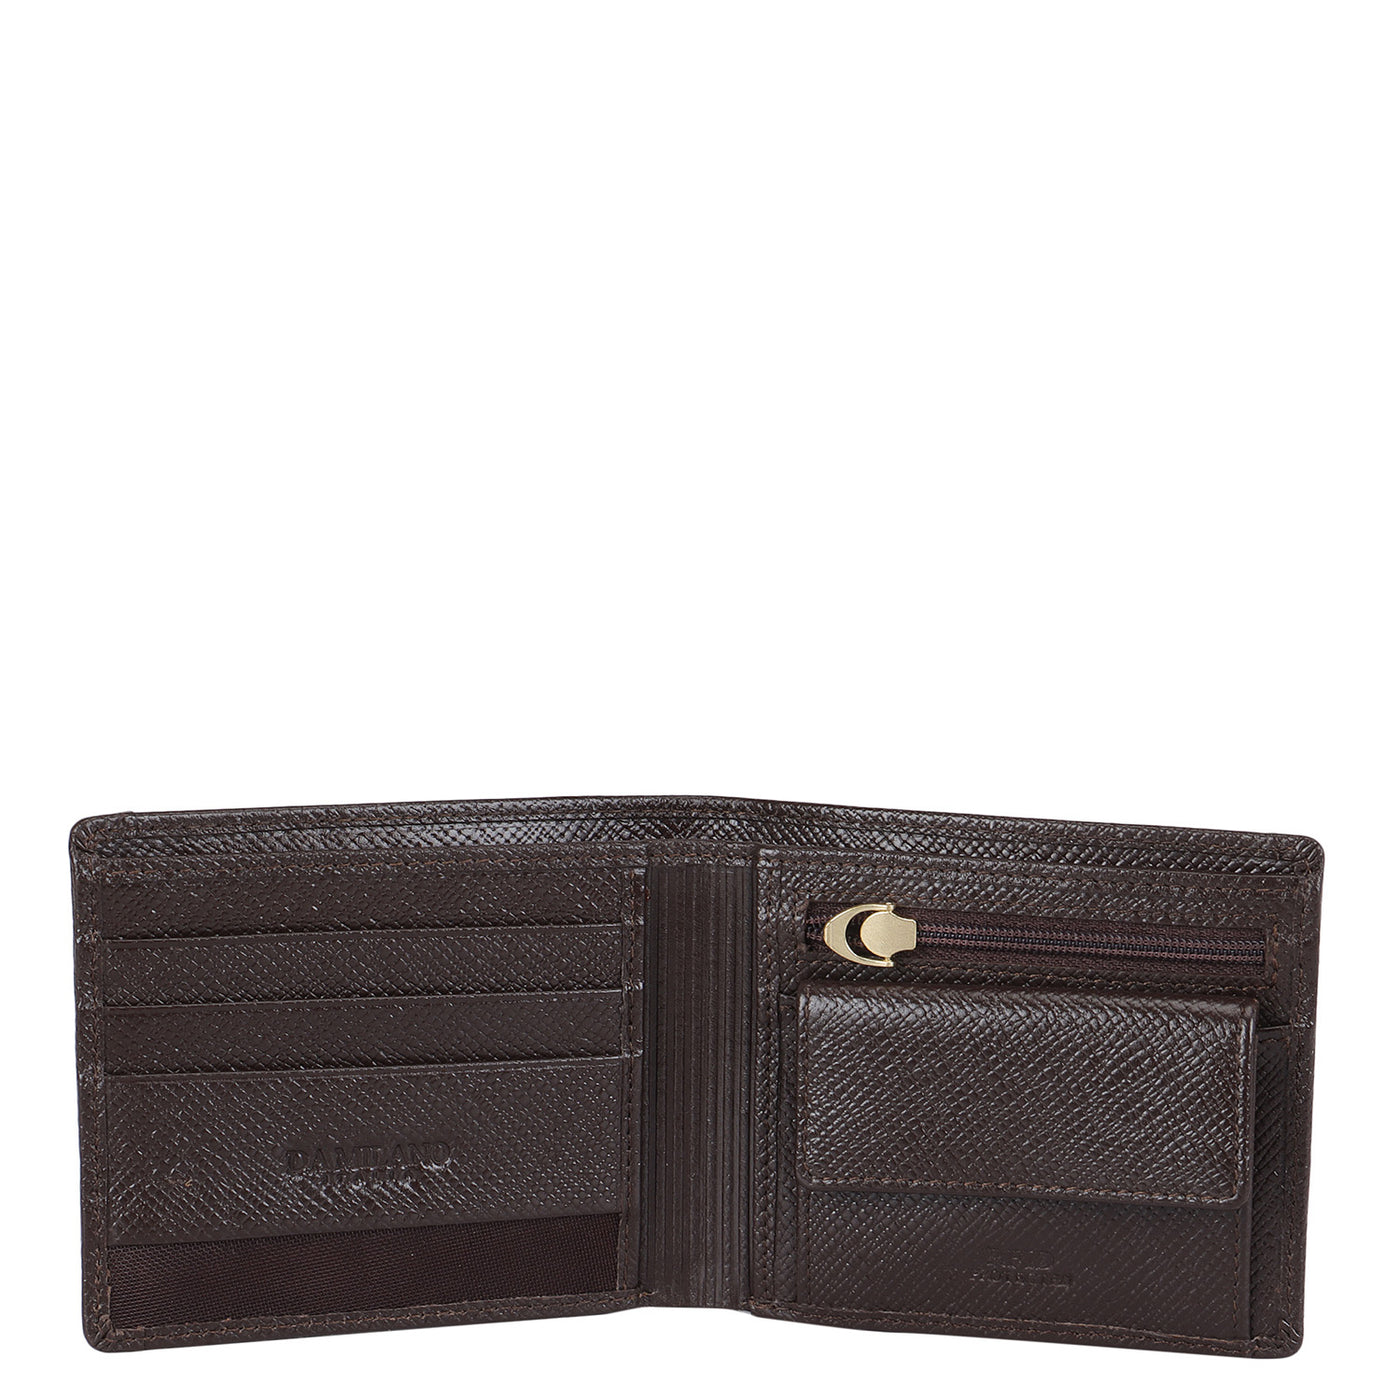 Brown Croco Leather Mens Wallet & Keychain Gift Set